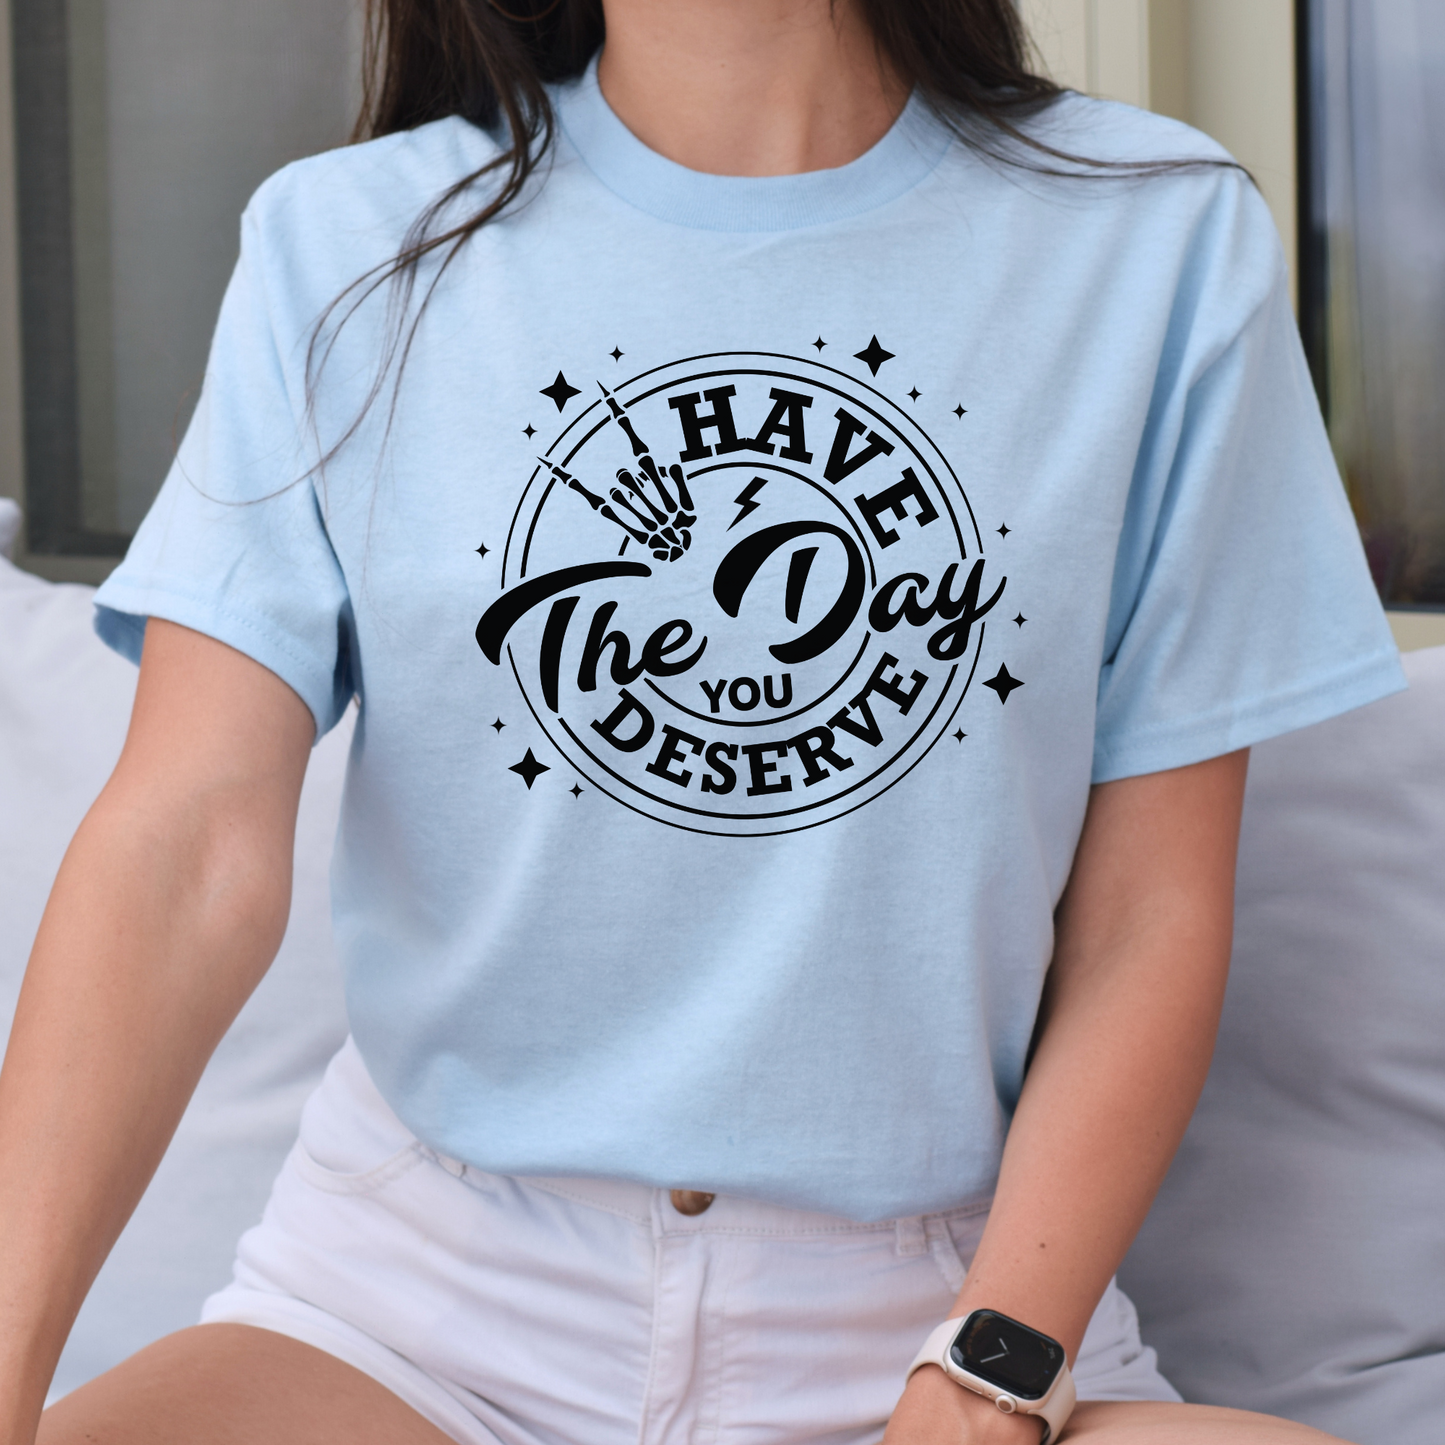 Have The Day You Deserve T-shirt